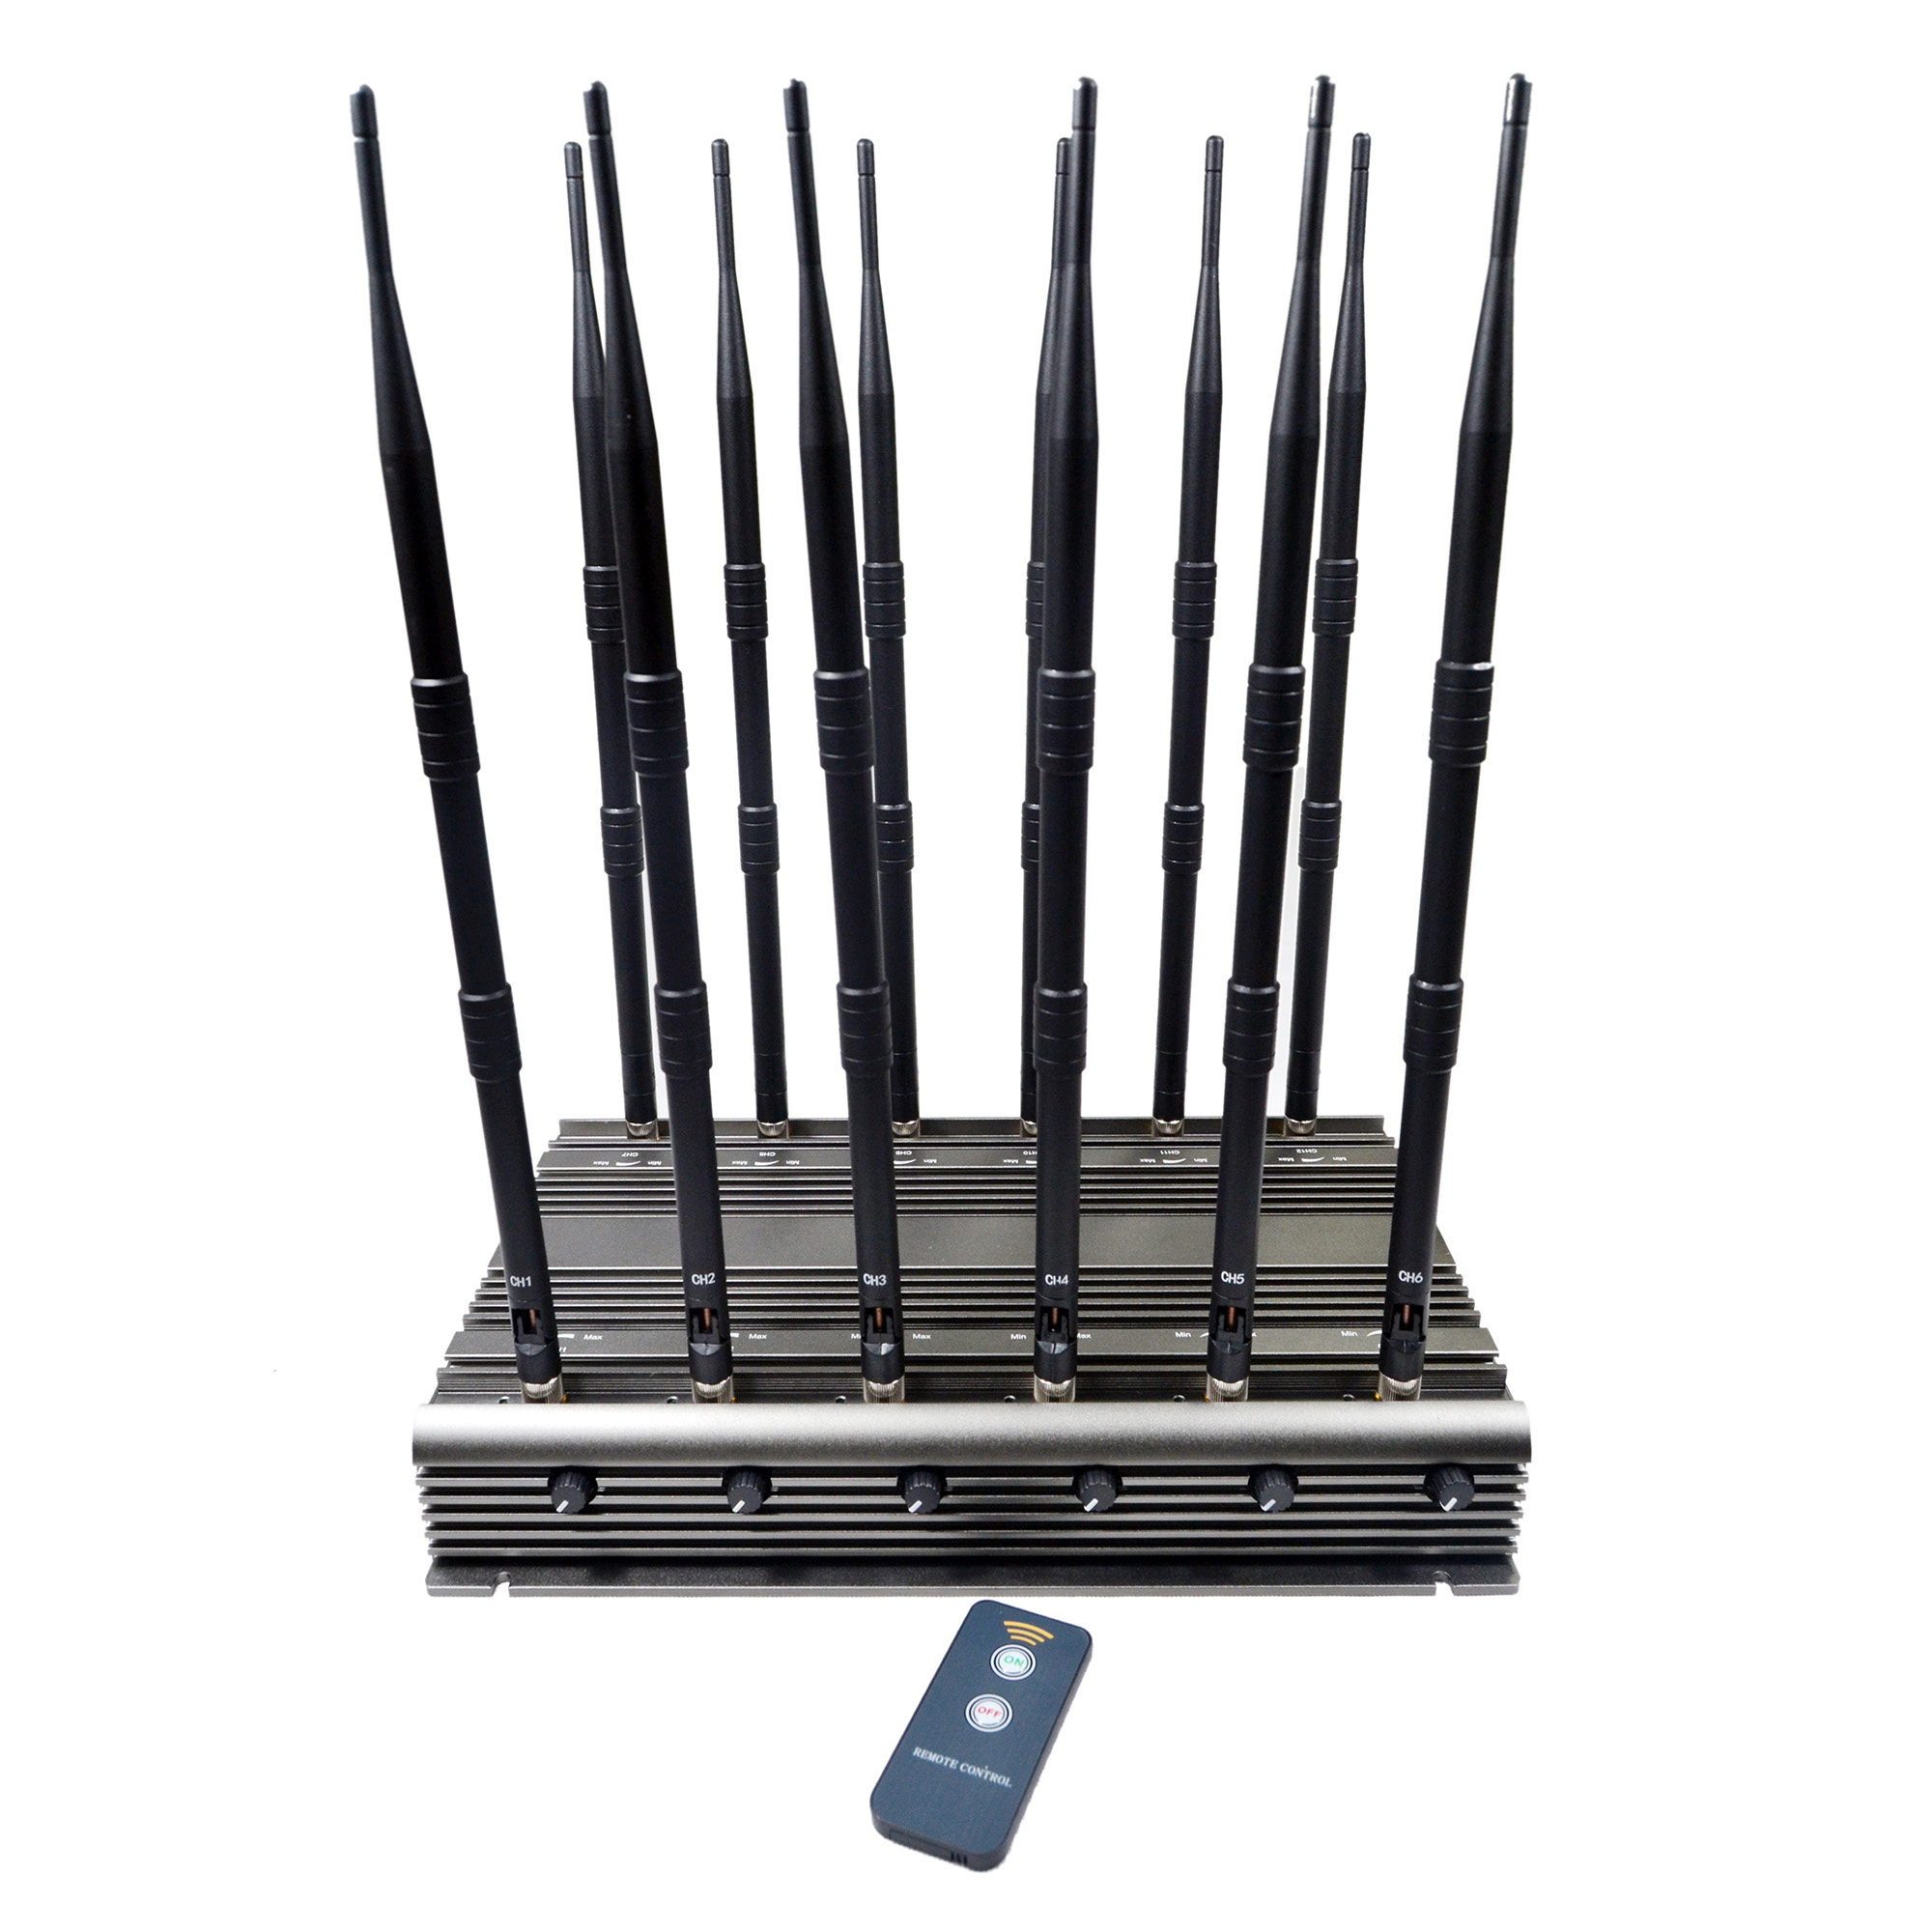 jammer review parturition wiki - New 12 Antennas High Power Mobile Phone 3G 4G 5G Signal Jammer WIFI GPS LOJACK UHF VHF